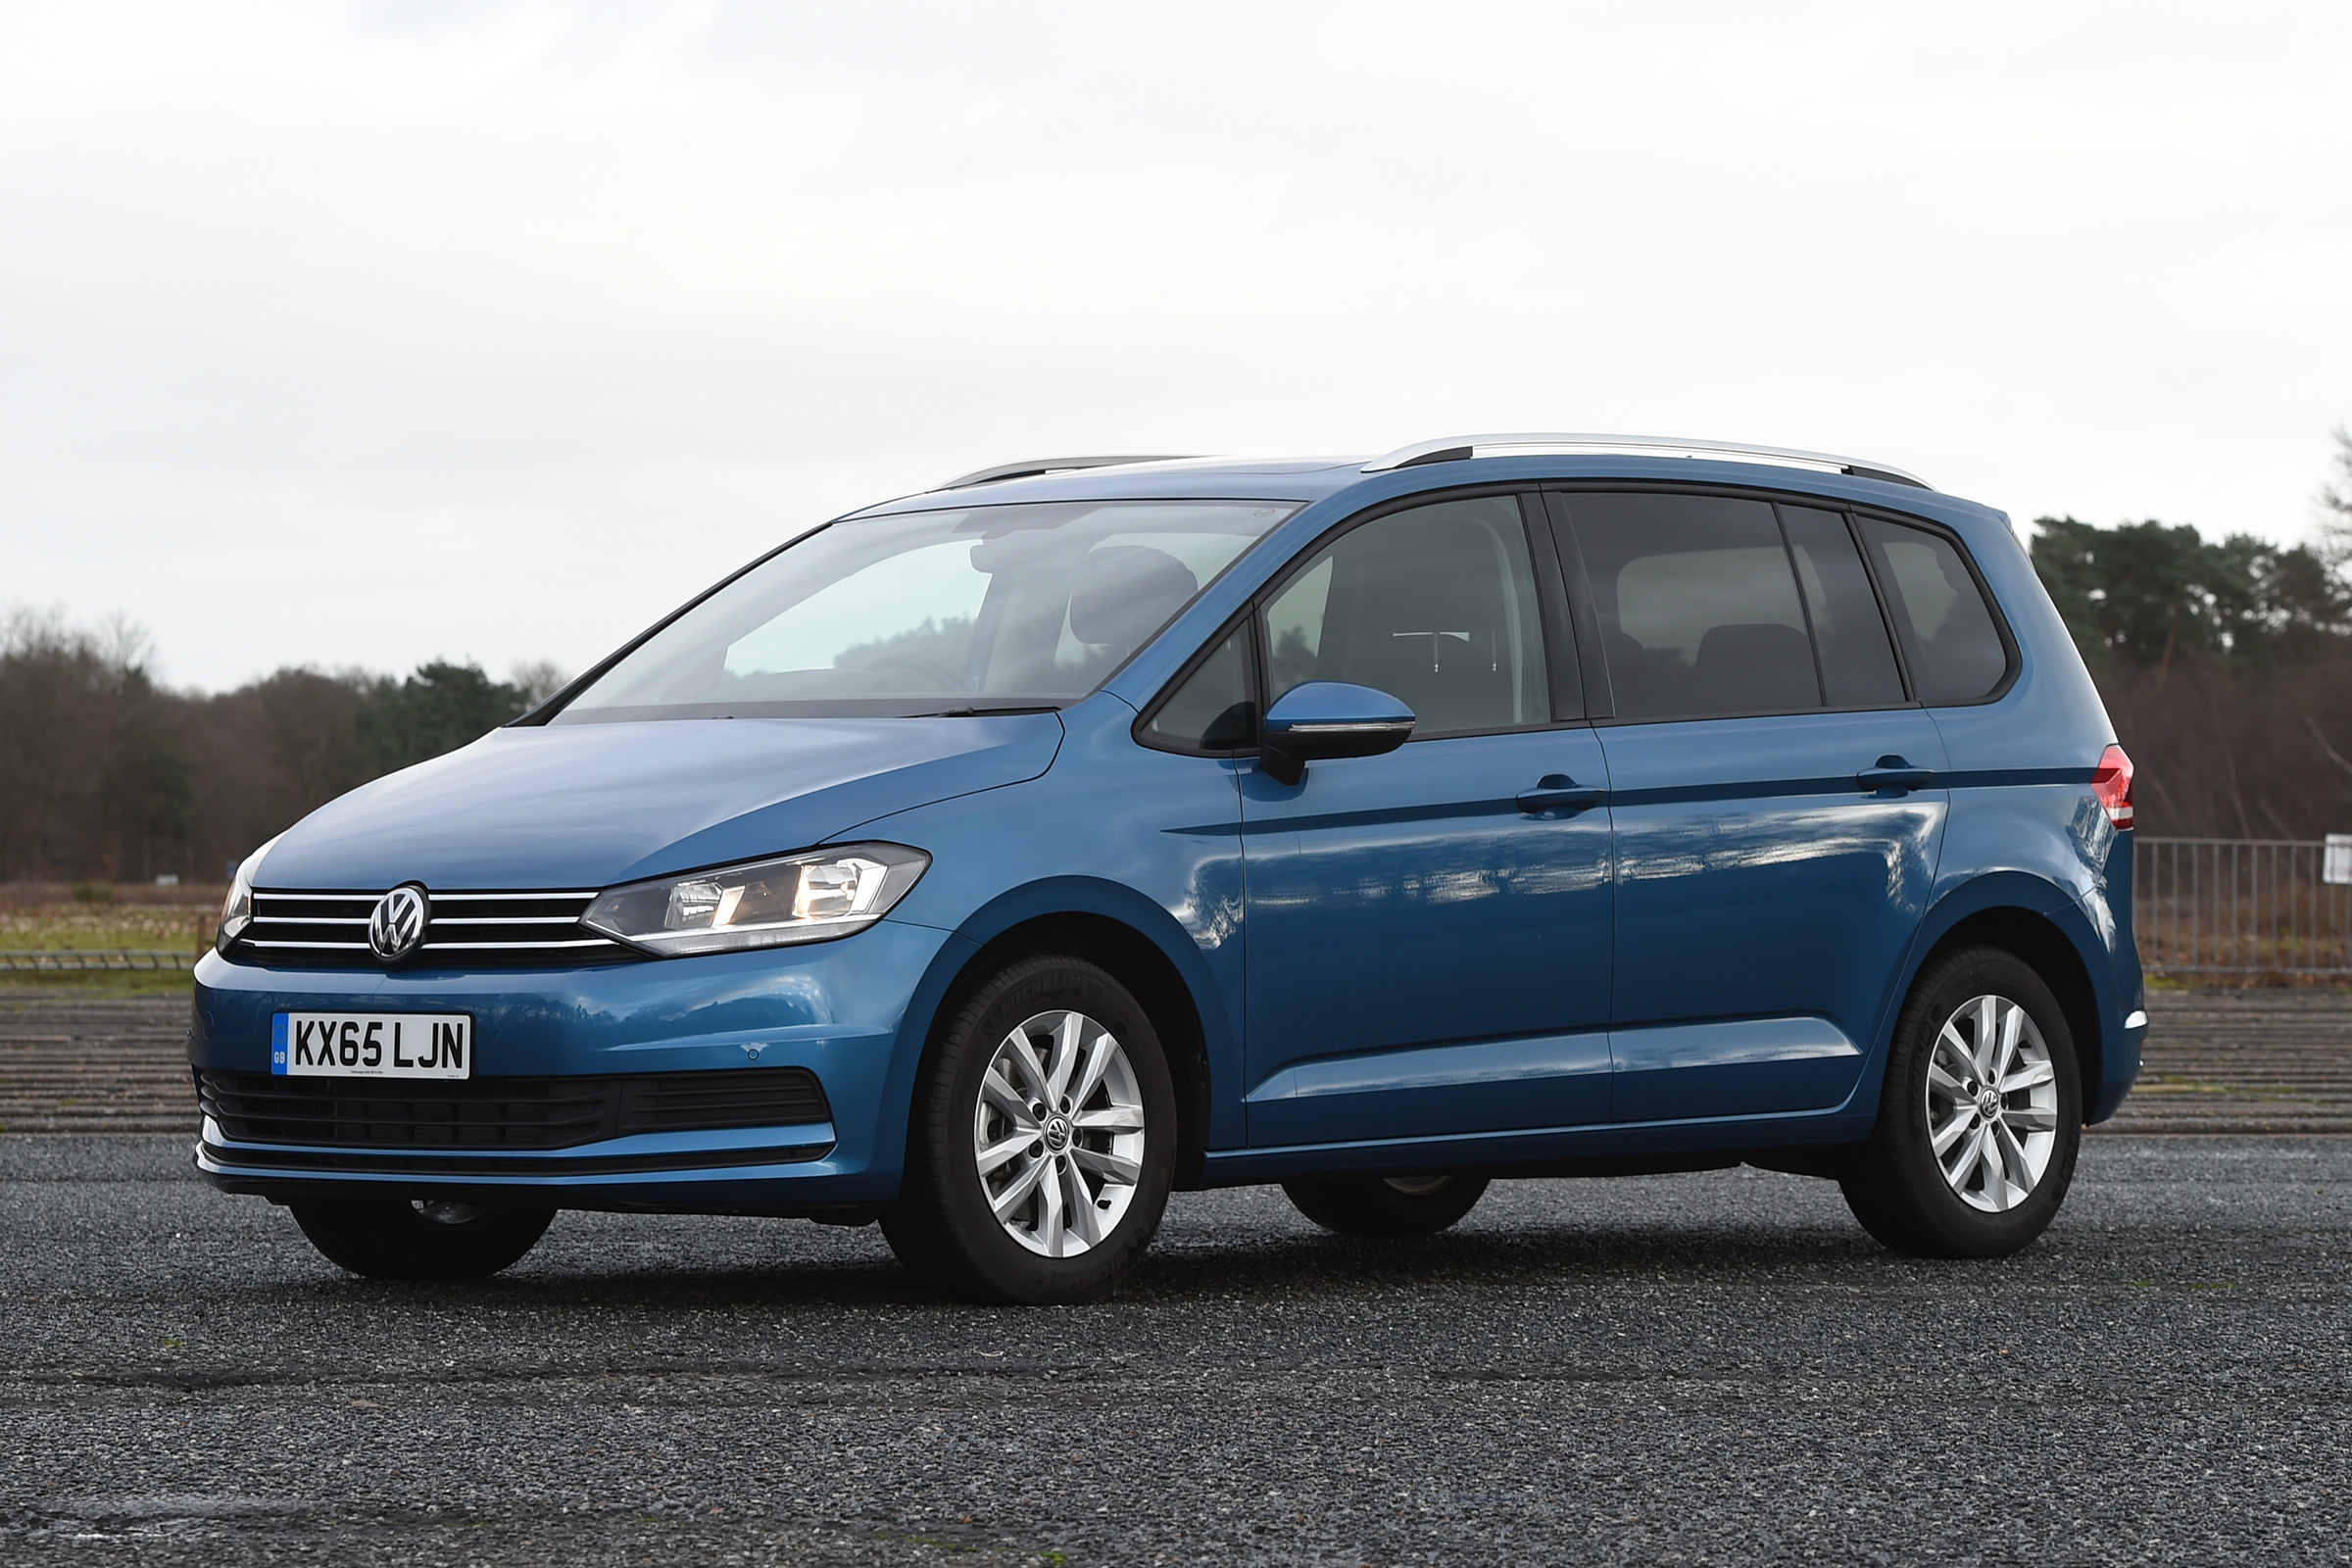 2021 Volkswagen Touran Review: See Why It's Our Favourite People Carrier!